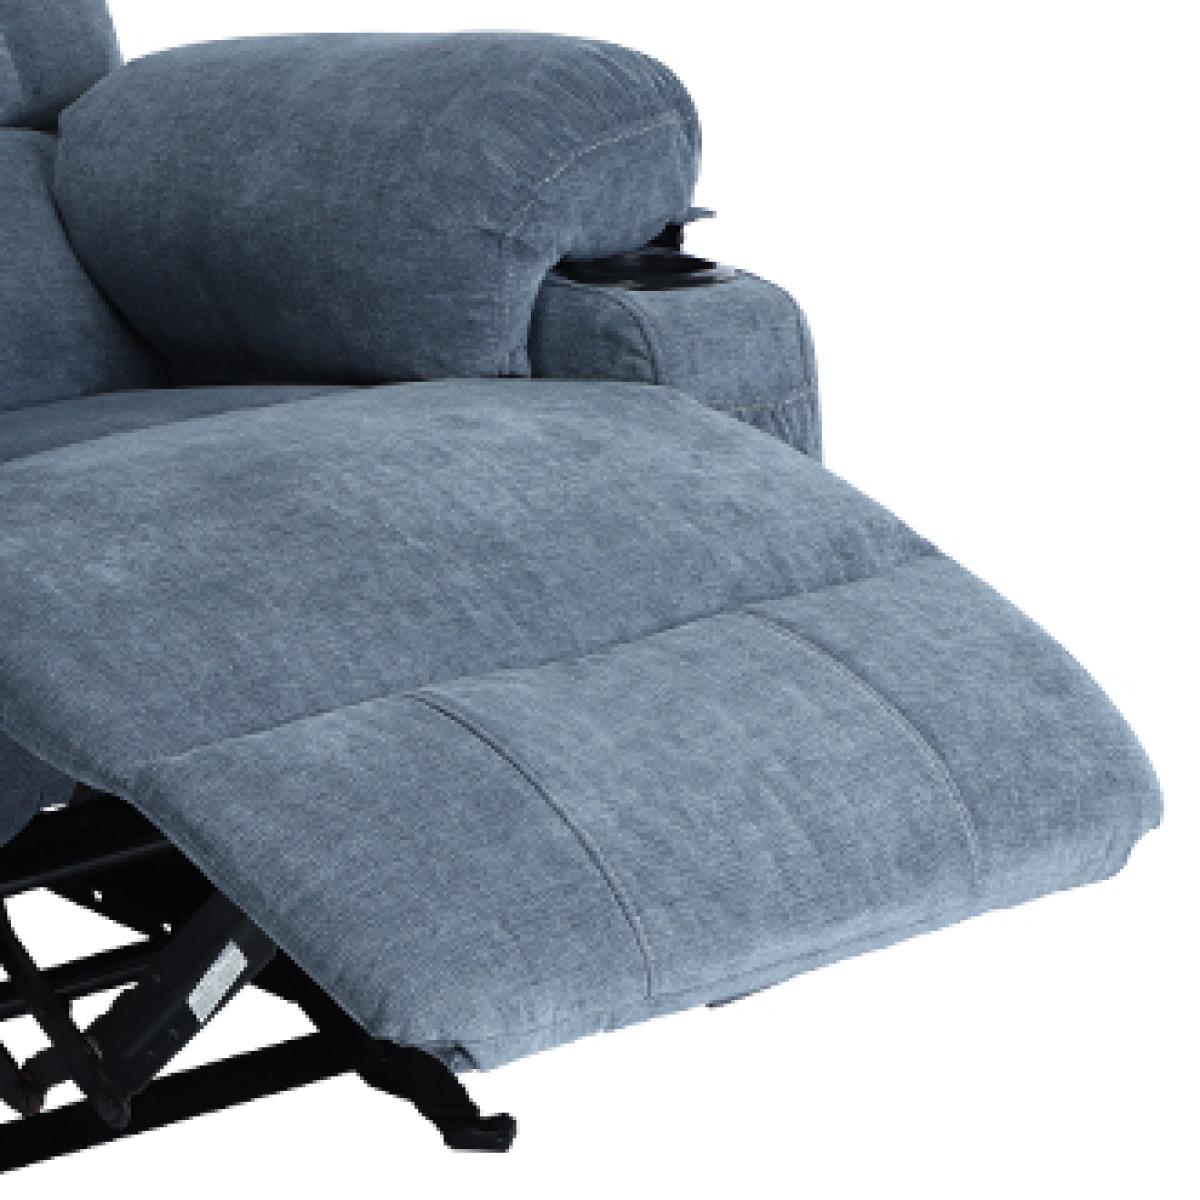 Vanbow.Recliner Chair Massage Heating sofa with Usb and side pocket 2 Cup Holders (Blue)